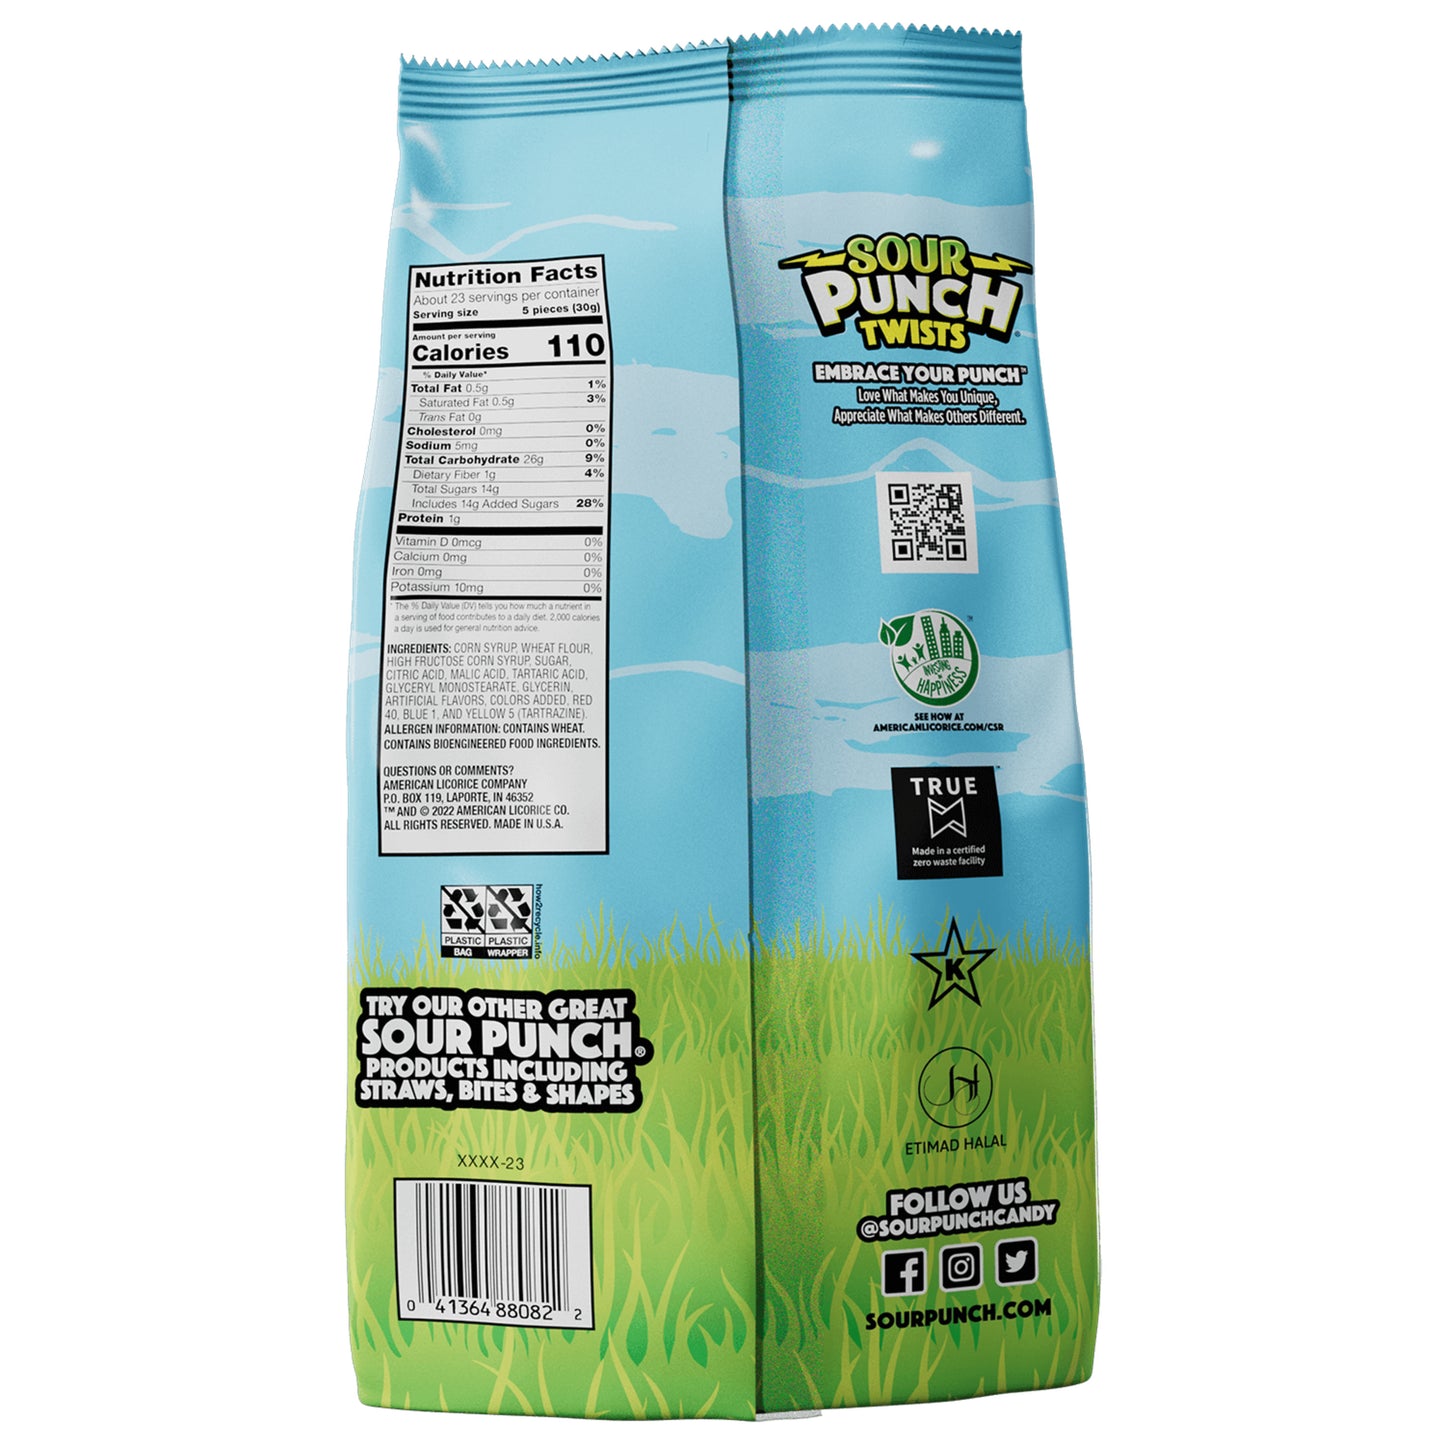 SOUR PUNCH Easter Candy Twists back of 24.5oz bag